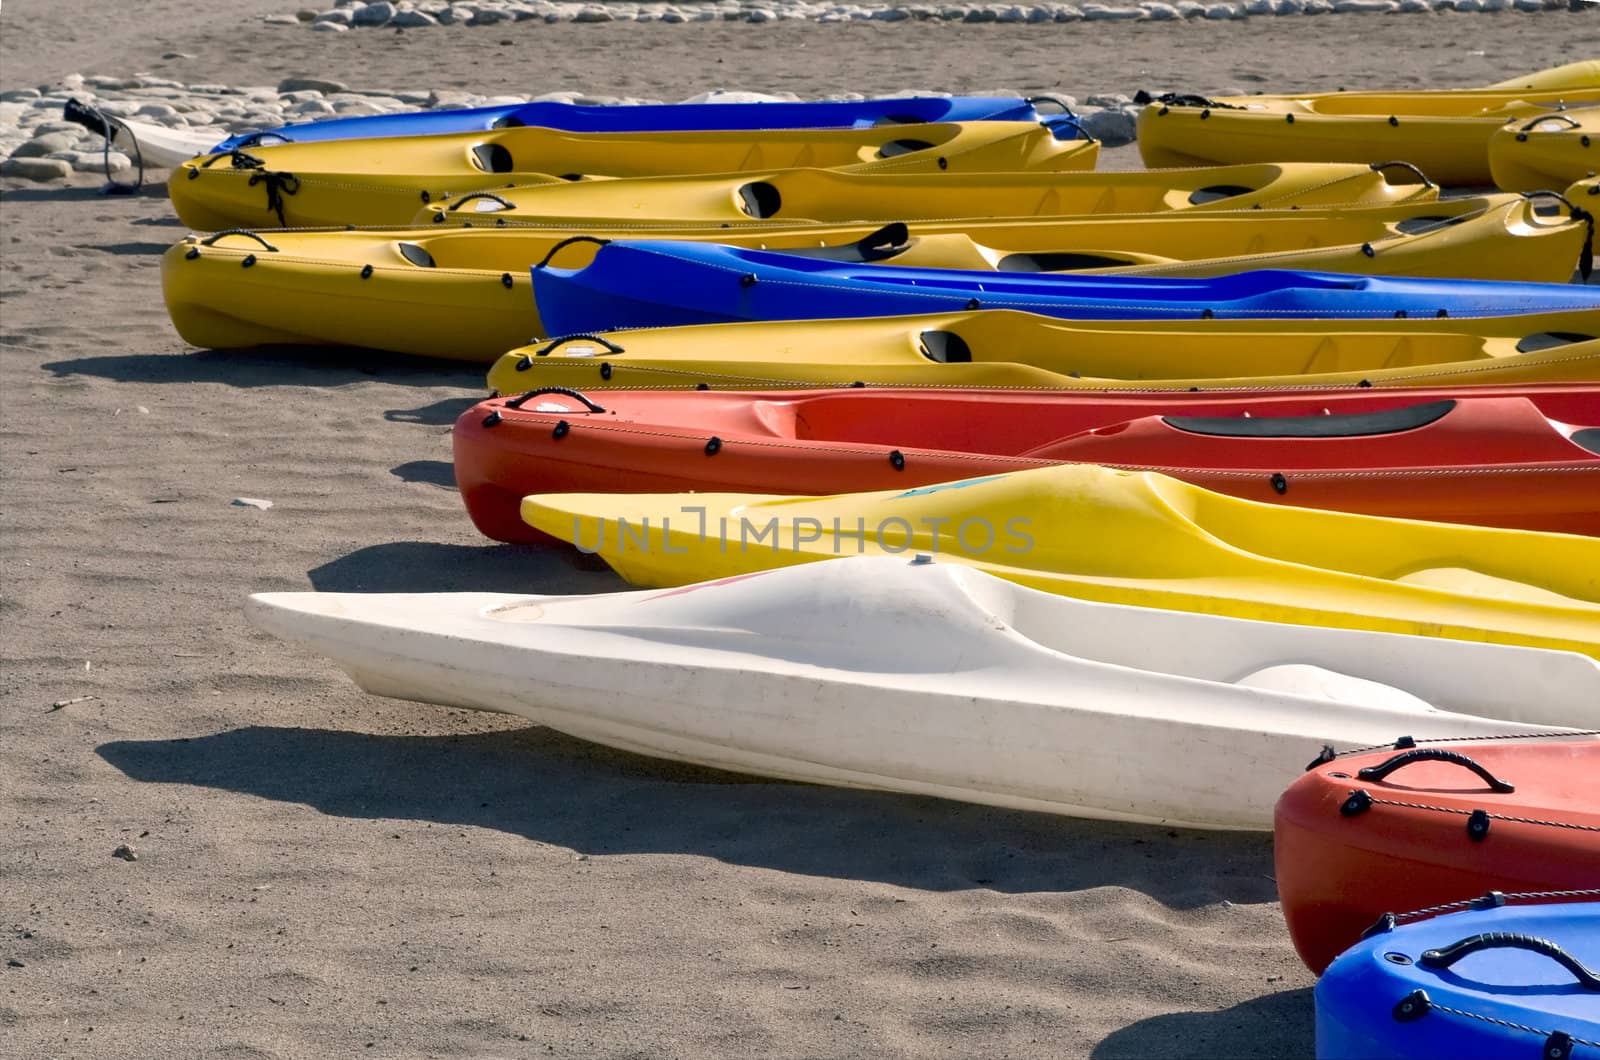 Bright white, yellow, red and blue canoes lie on sandy beach